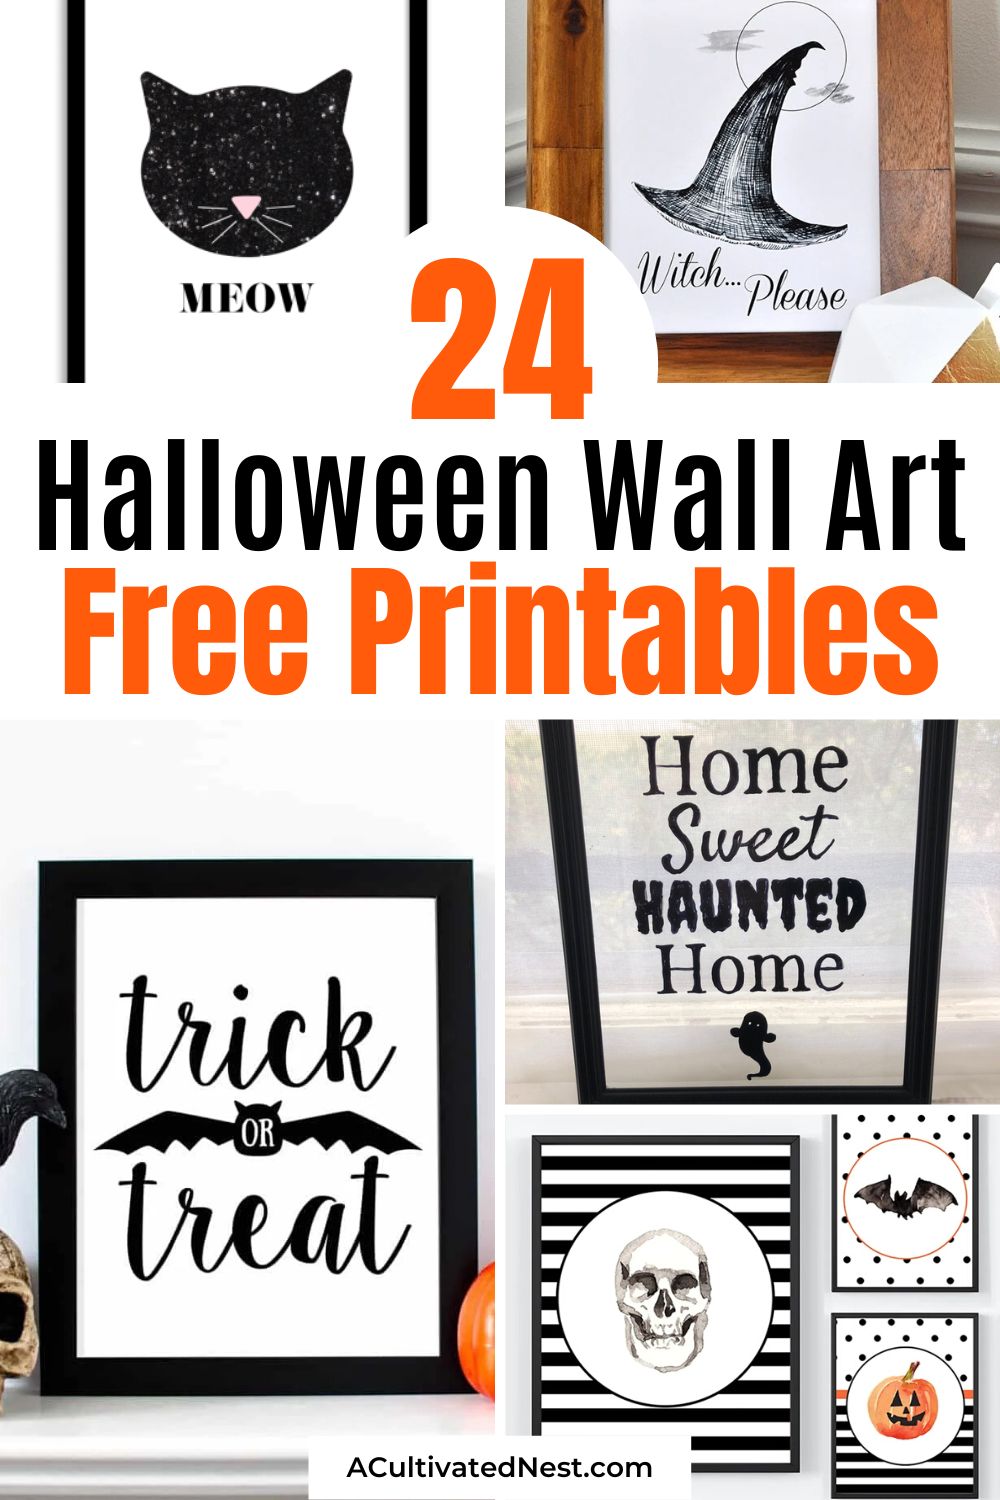 24 Halloween Wall Art Free Printables- Get your home ready for Halloween on a budget with these Halloween wall art free printables! There are so many spooky free art prints to choose from! | #HalloweenDecor #freePrintables #wallArtwork #printables #ACultivatedNest